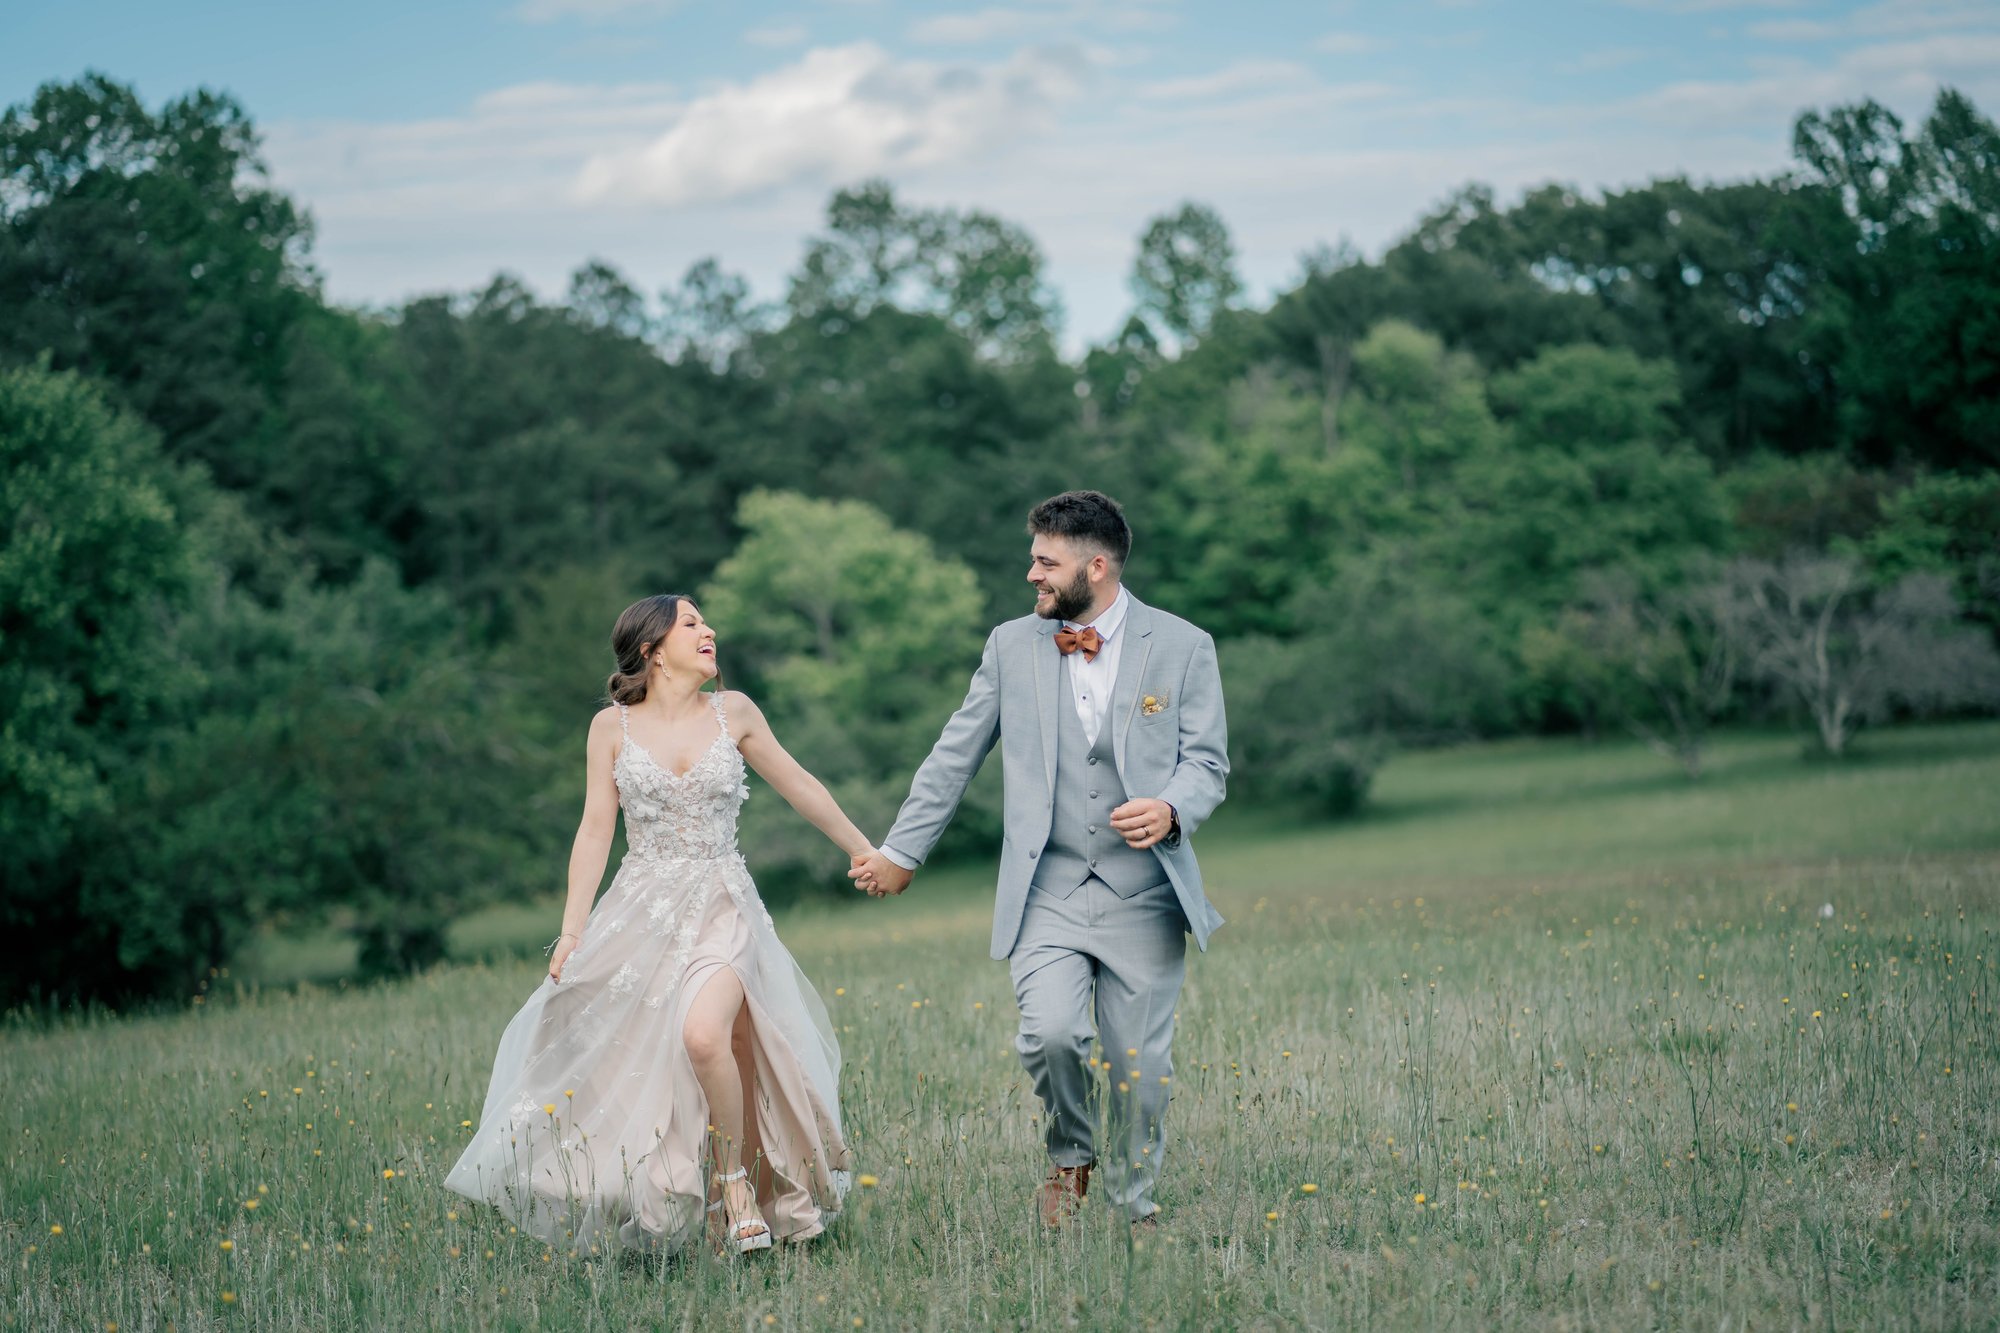 Wedding Photography of a Richmond Virginia Couple captured by Stephanie Grooms Artistry